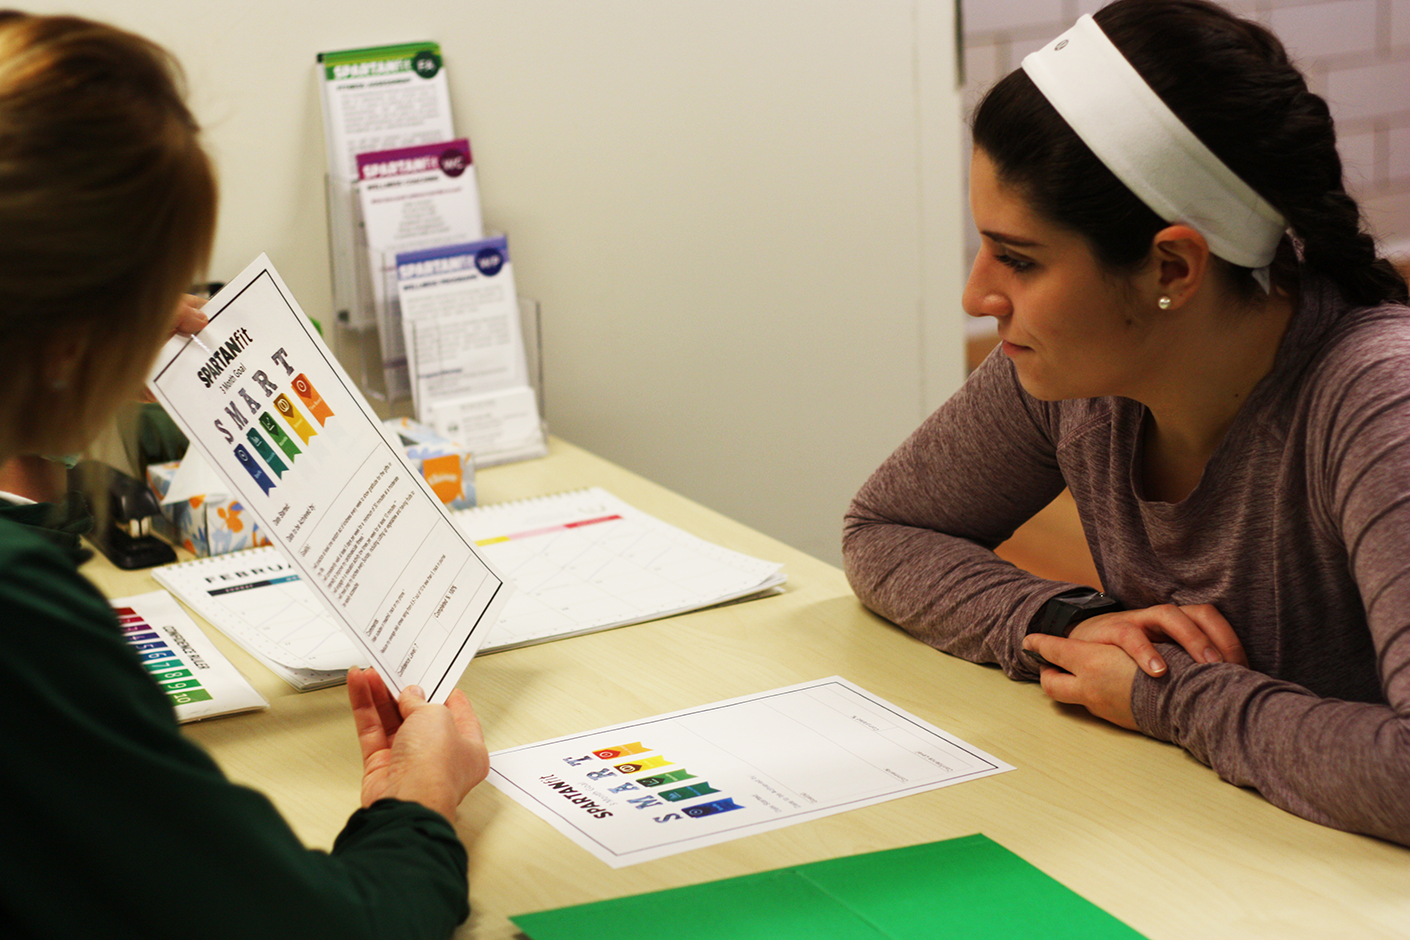 A student meets with a Health Promotion team member to discuss their fitness goals.